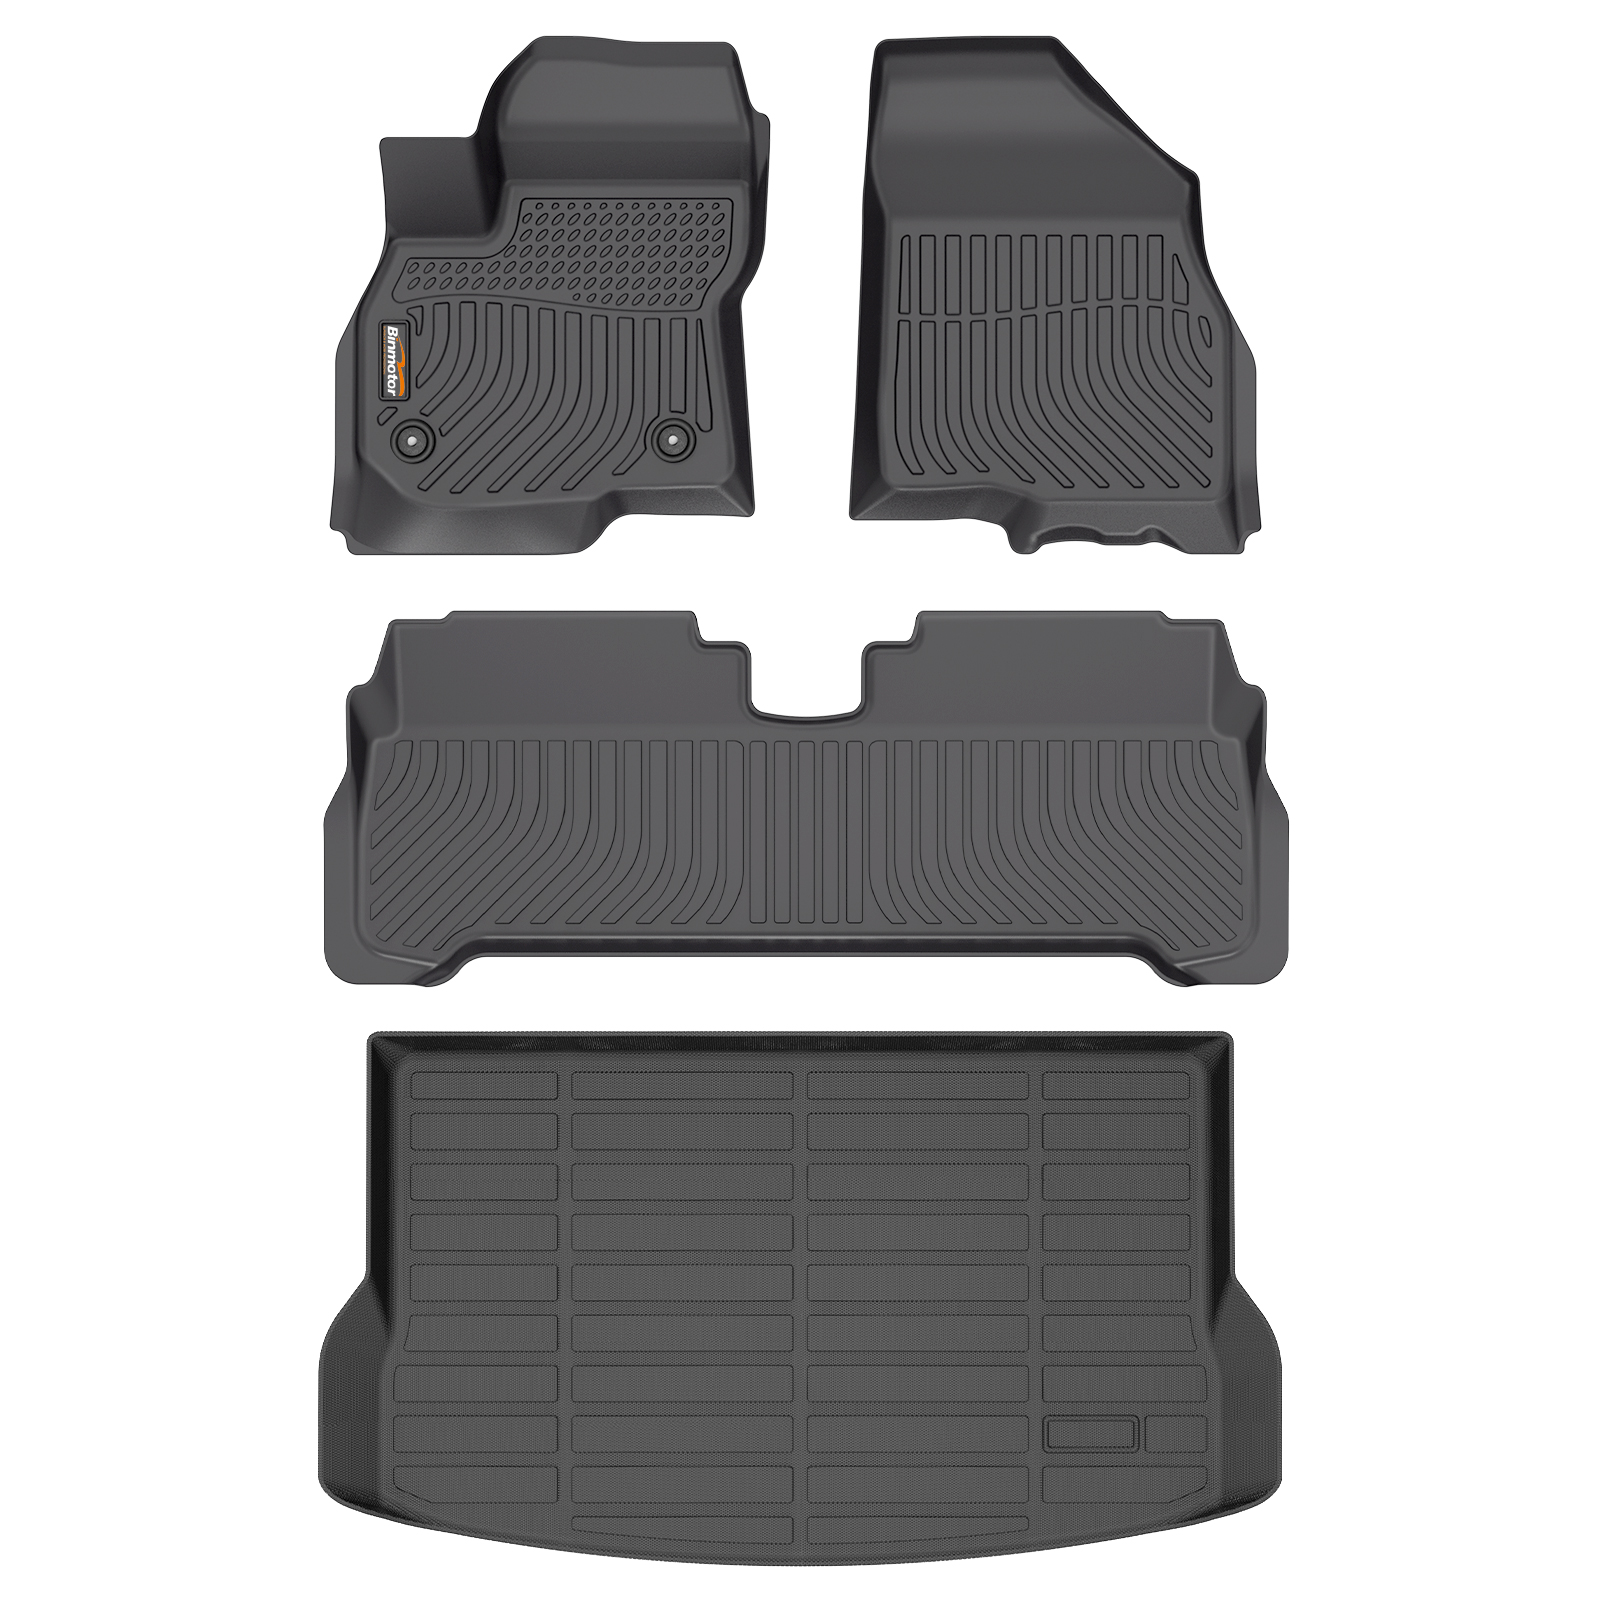 Binmotor-Car Floor Mats & Cargo Liner for Chevrolet Chevy Bolt EUV (Not EV) All Weather Custom Fit Full Set Accessories -Black(compatible year 2022-2024)